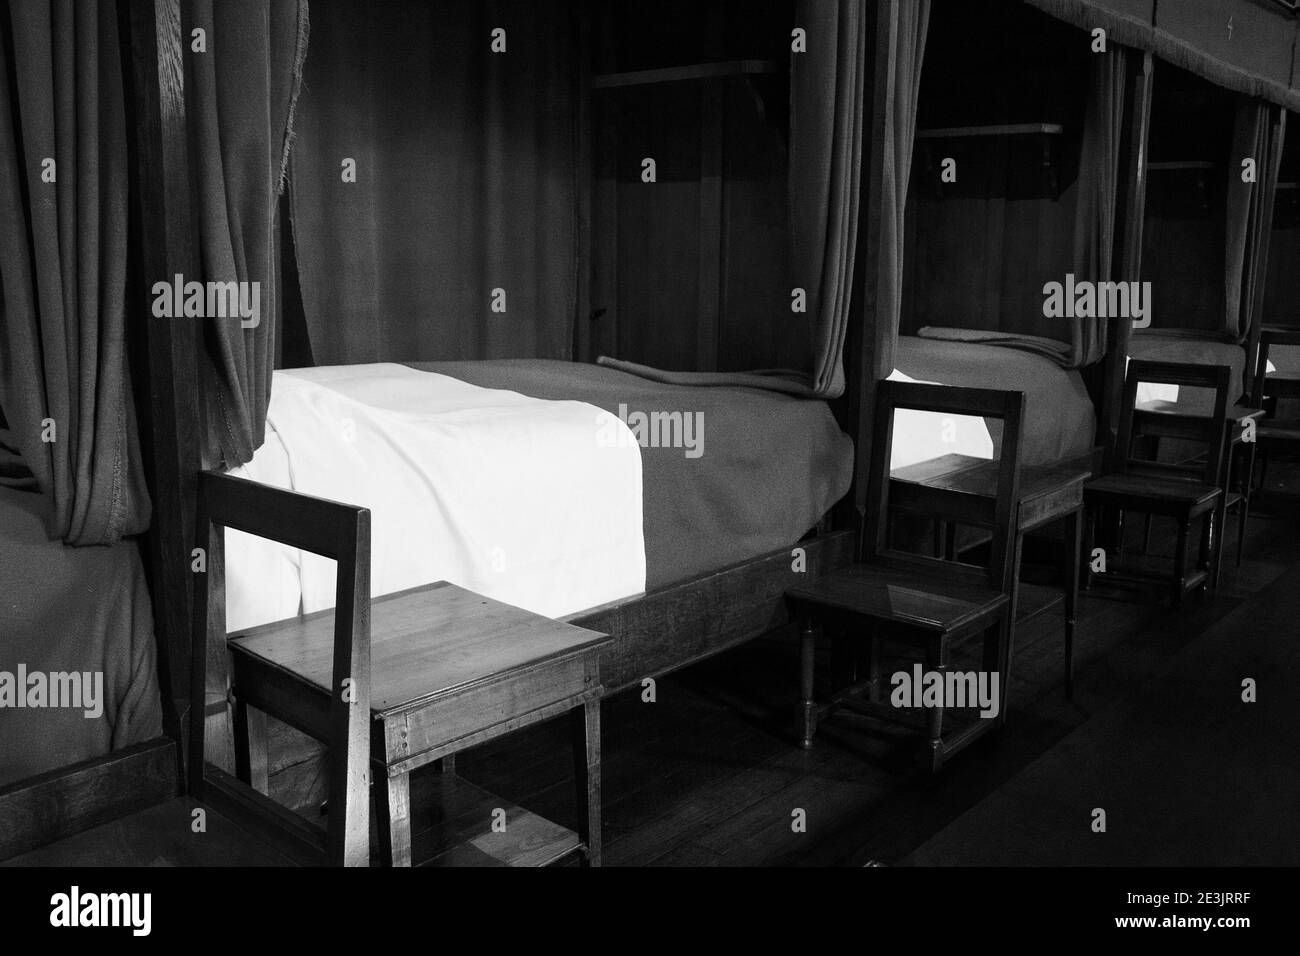 BEAUNE, FRANCE - AUGUST 17, 2018: Hospices or Hotel-Dieu de Beaune, hospital for poor people founded in 1443. Interior. Patient beds. Black white Stock Photo